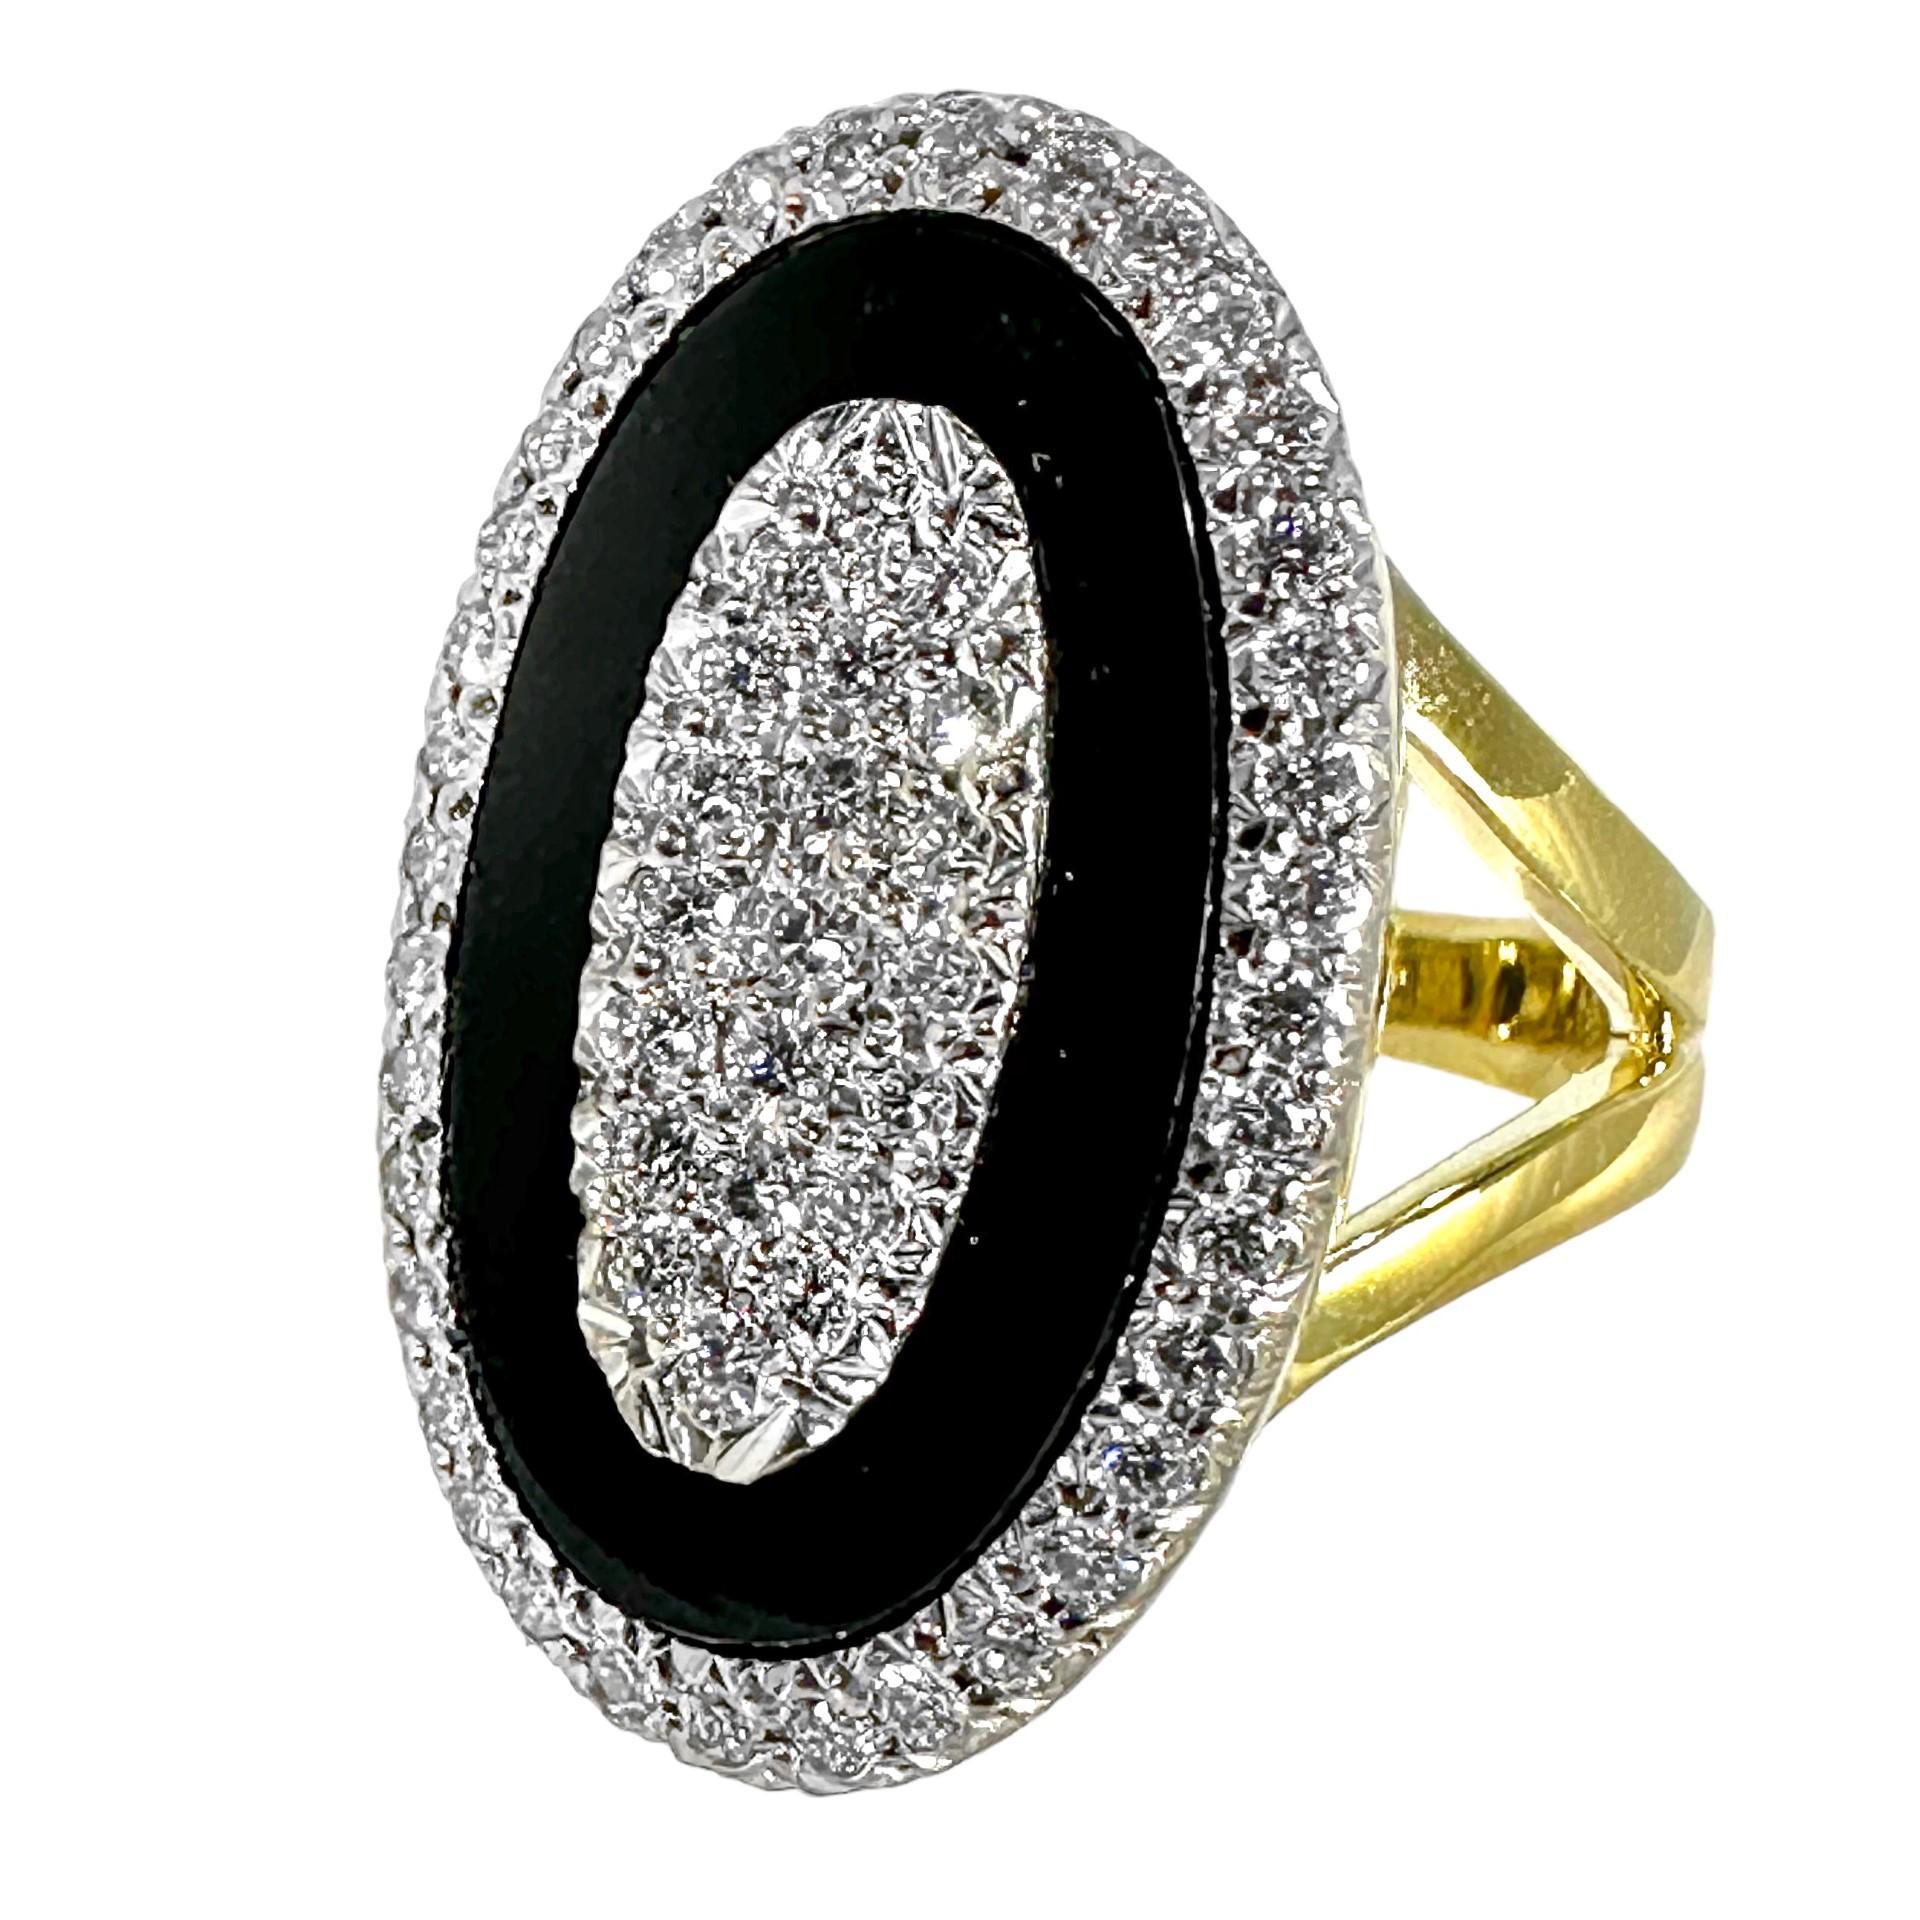 Onyx, Diamond and 18K Gold, Oval Shaped Ring 1 Inch Long x 5/8 Inch Wide For Sale 1